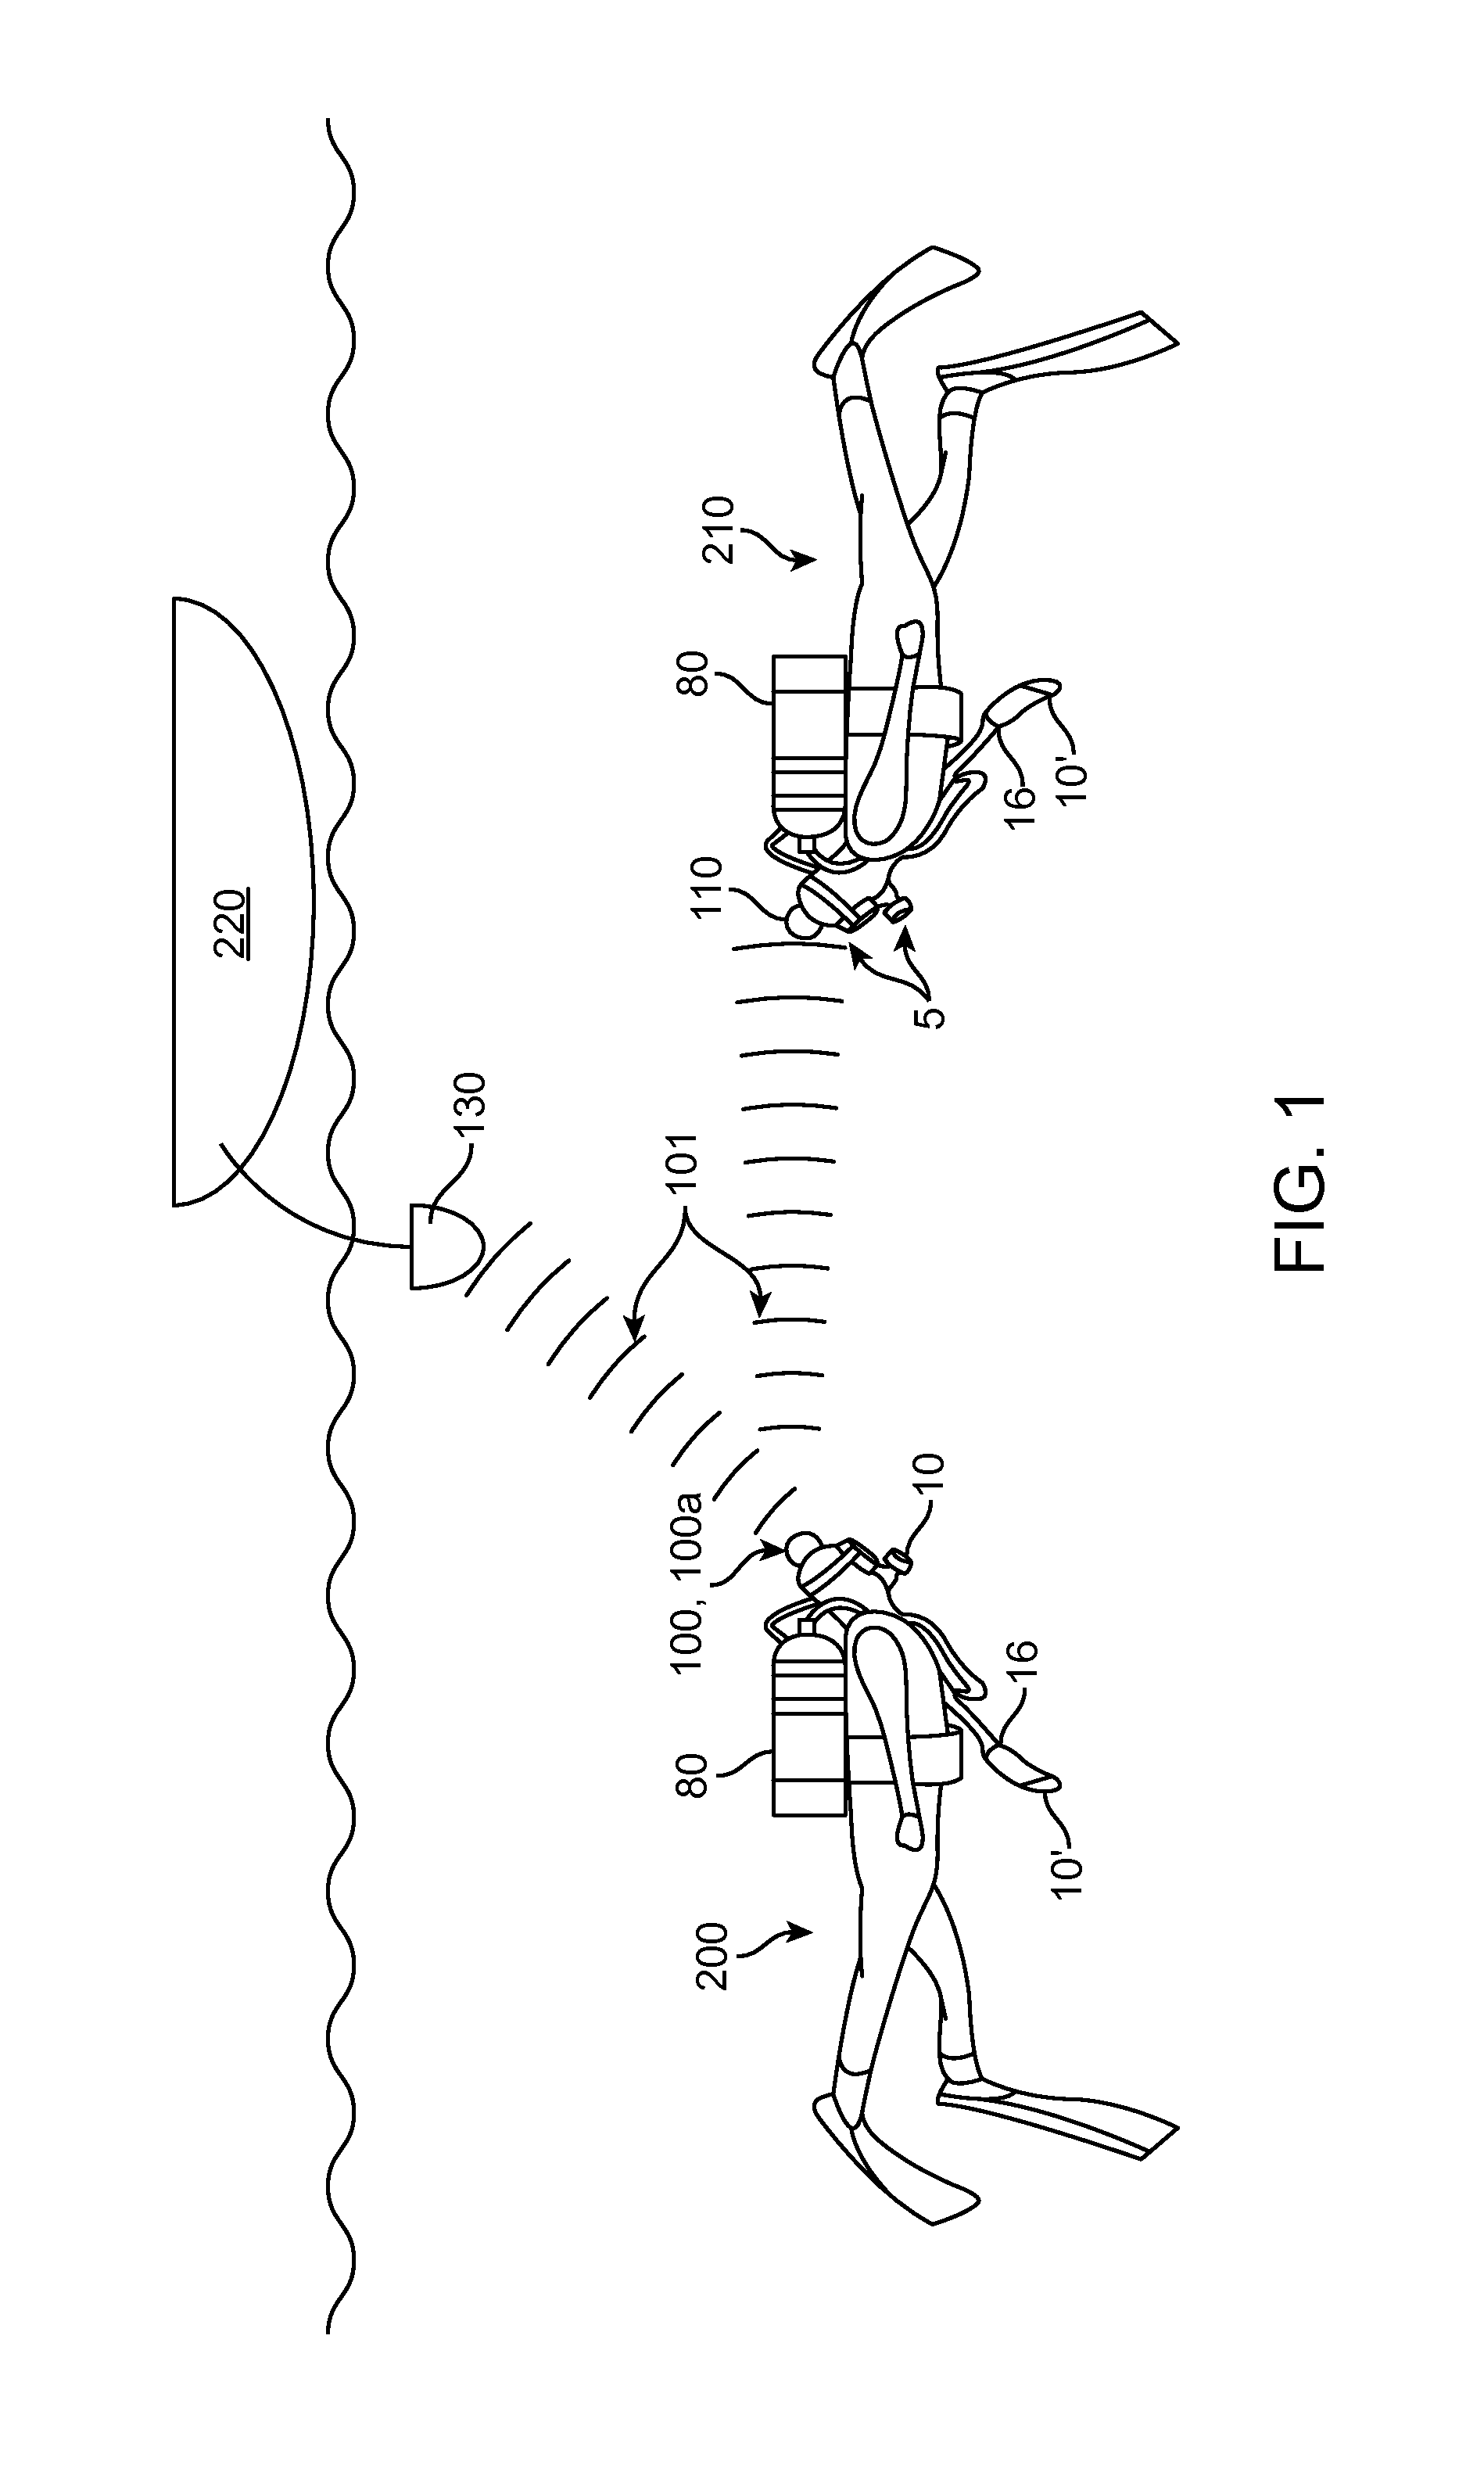 Apparatus, system and method for underwater signaling of audio messages to a diver